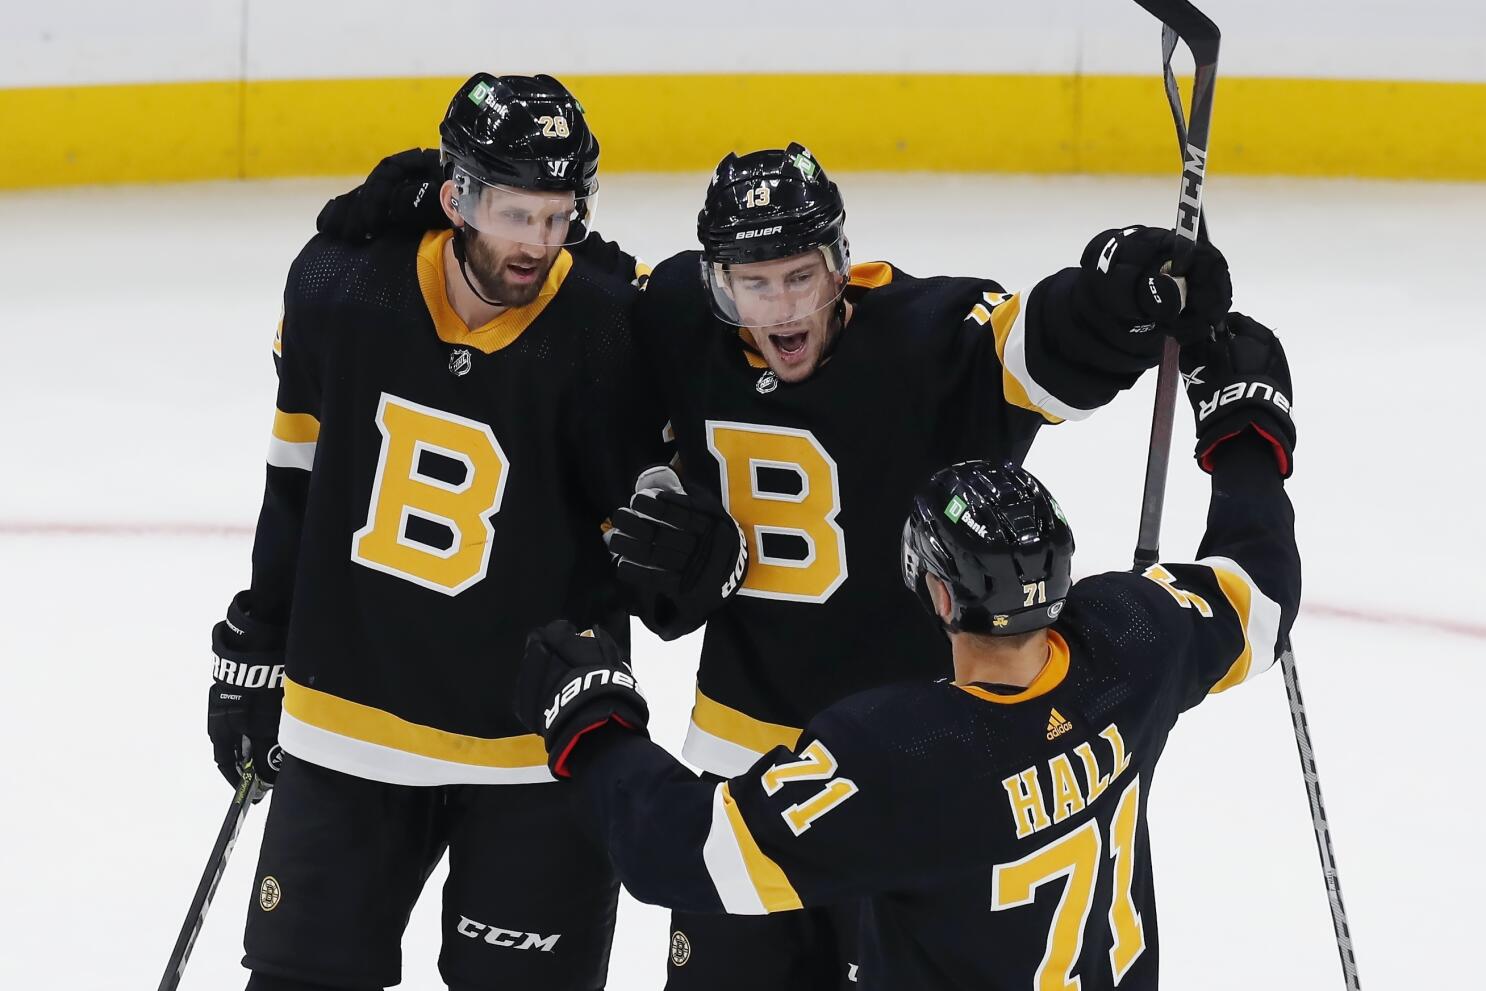 Bruins win beat Devils in shootout, spoil Lindy Ruff's debut as coach